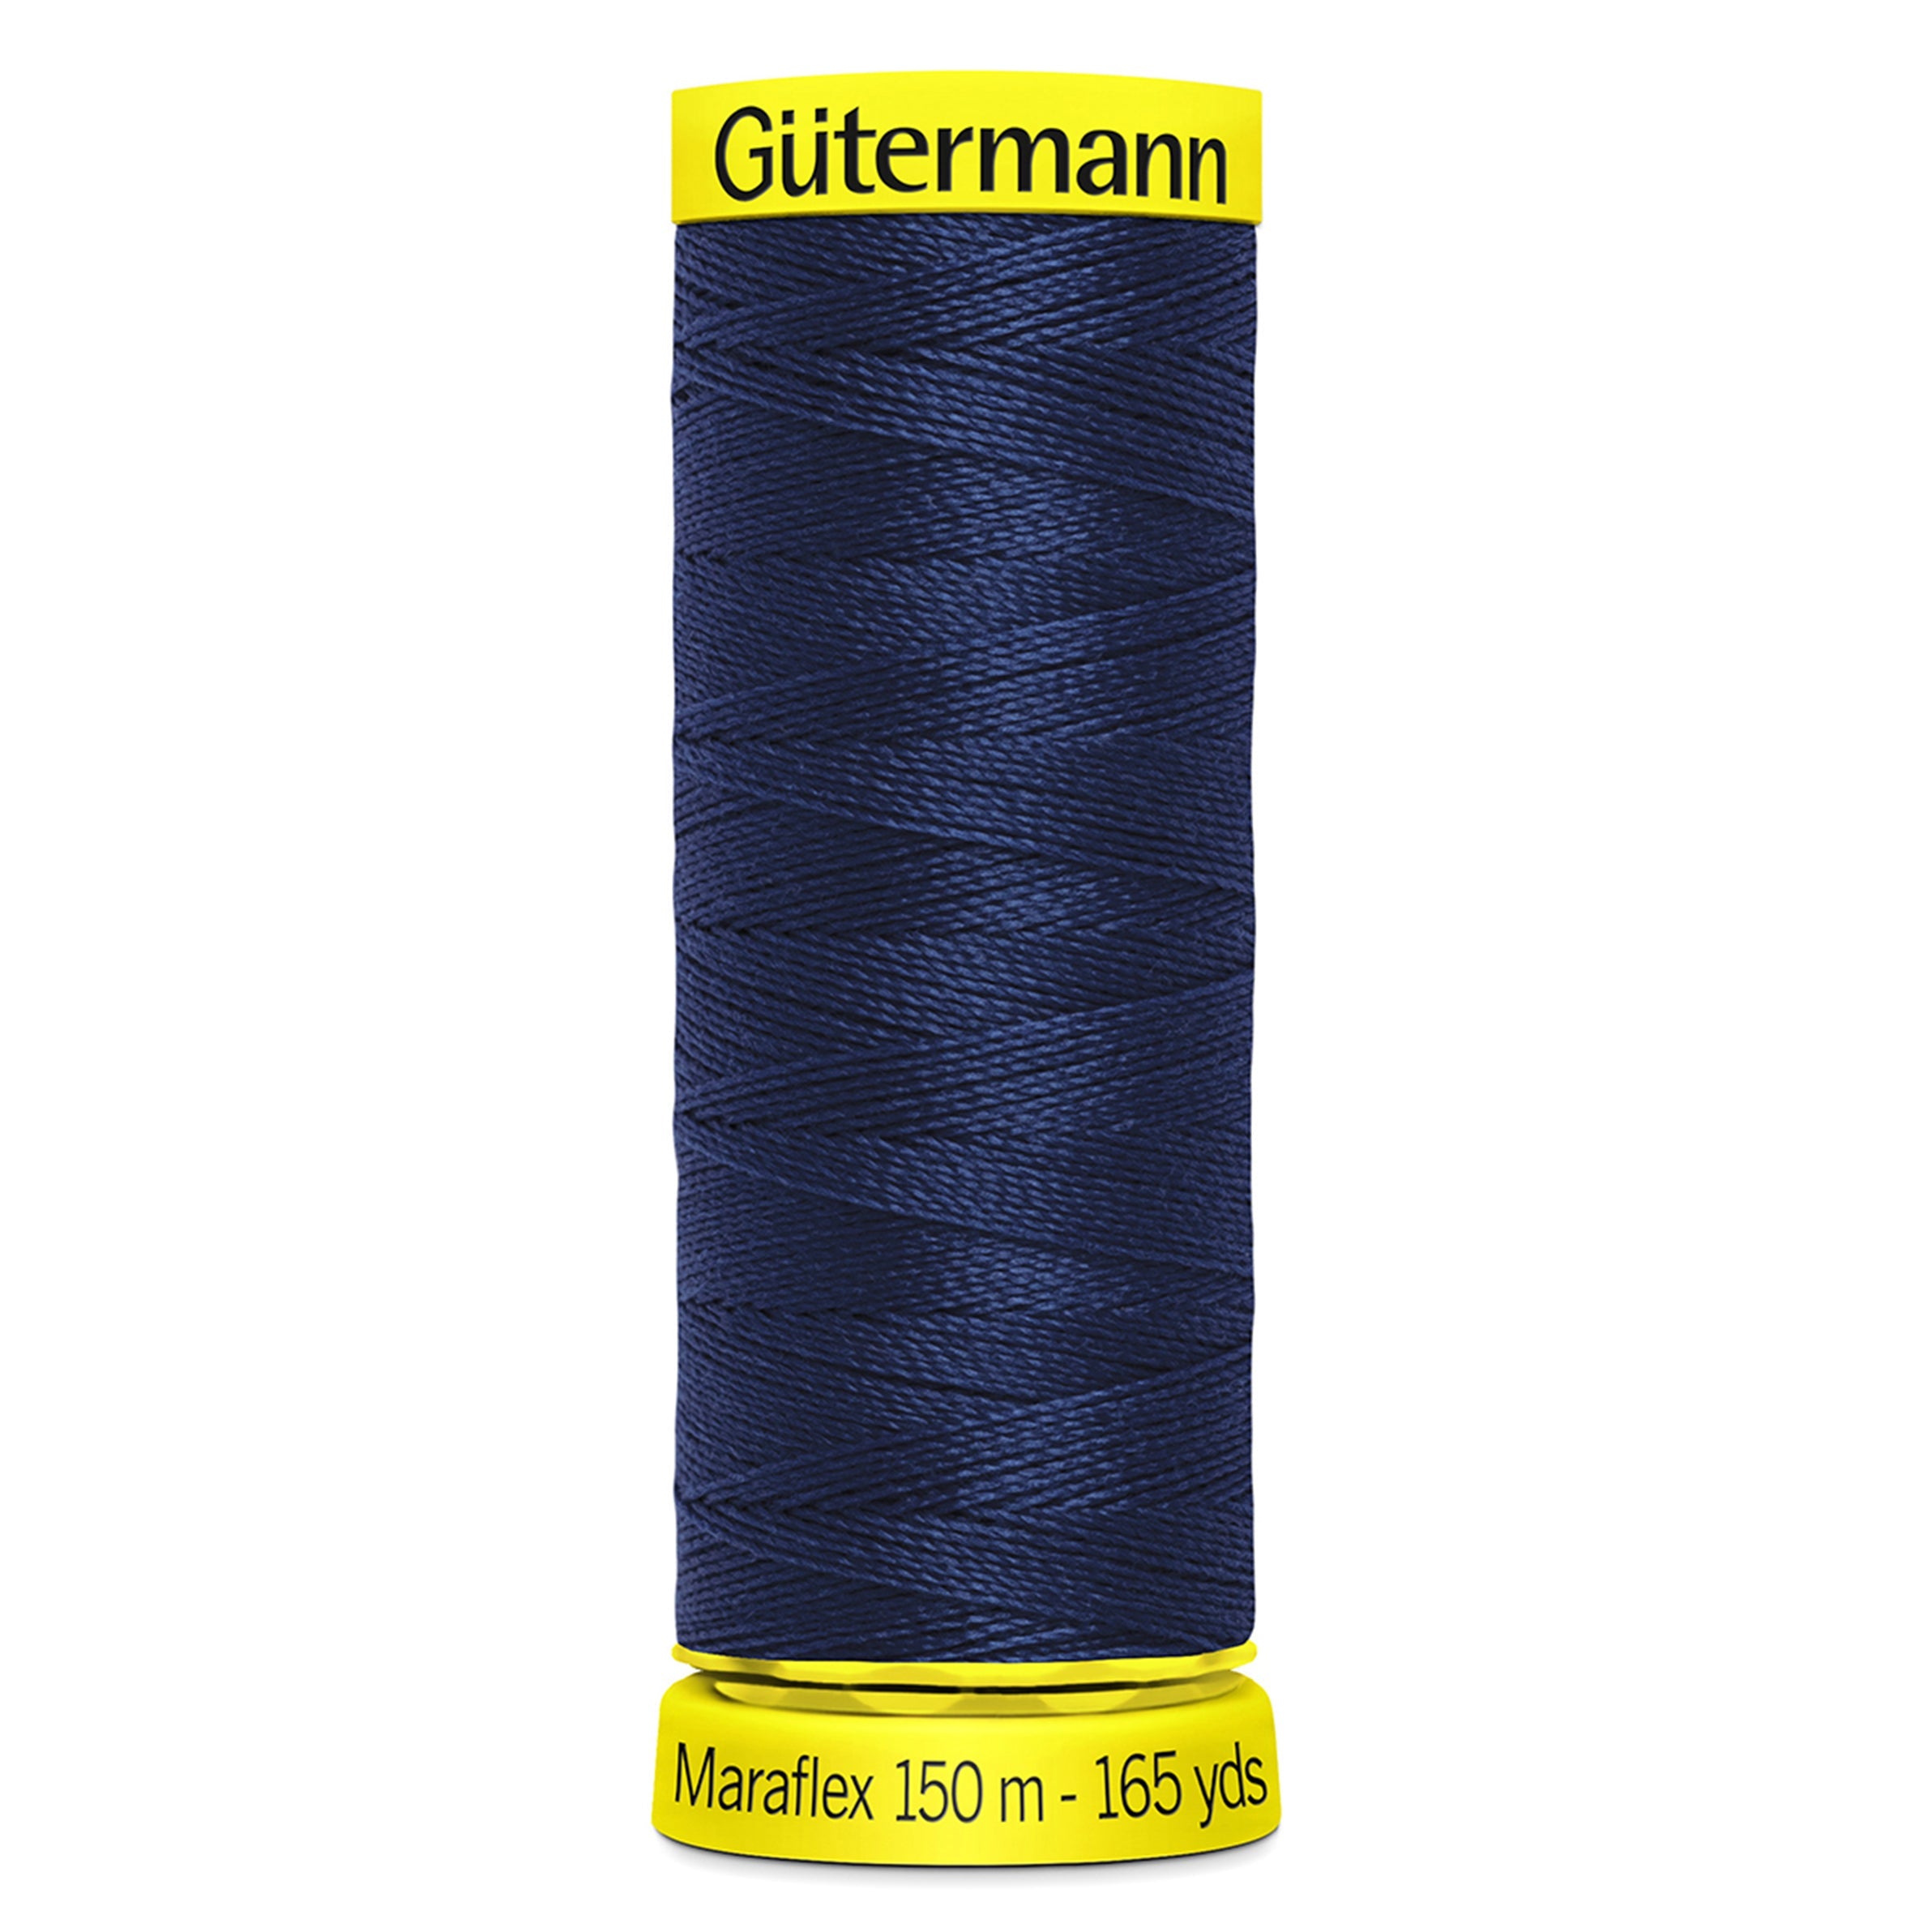 Gutermann Maraflex Stretchy Sewing Thread 150m colour 310 Midnight from Jaycotts Sewing Supplies